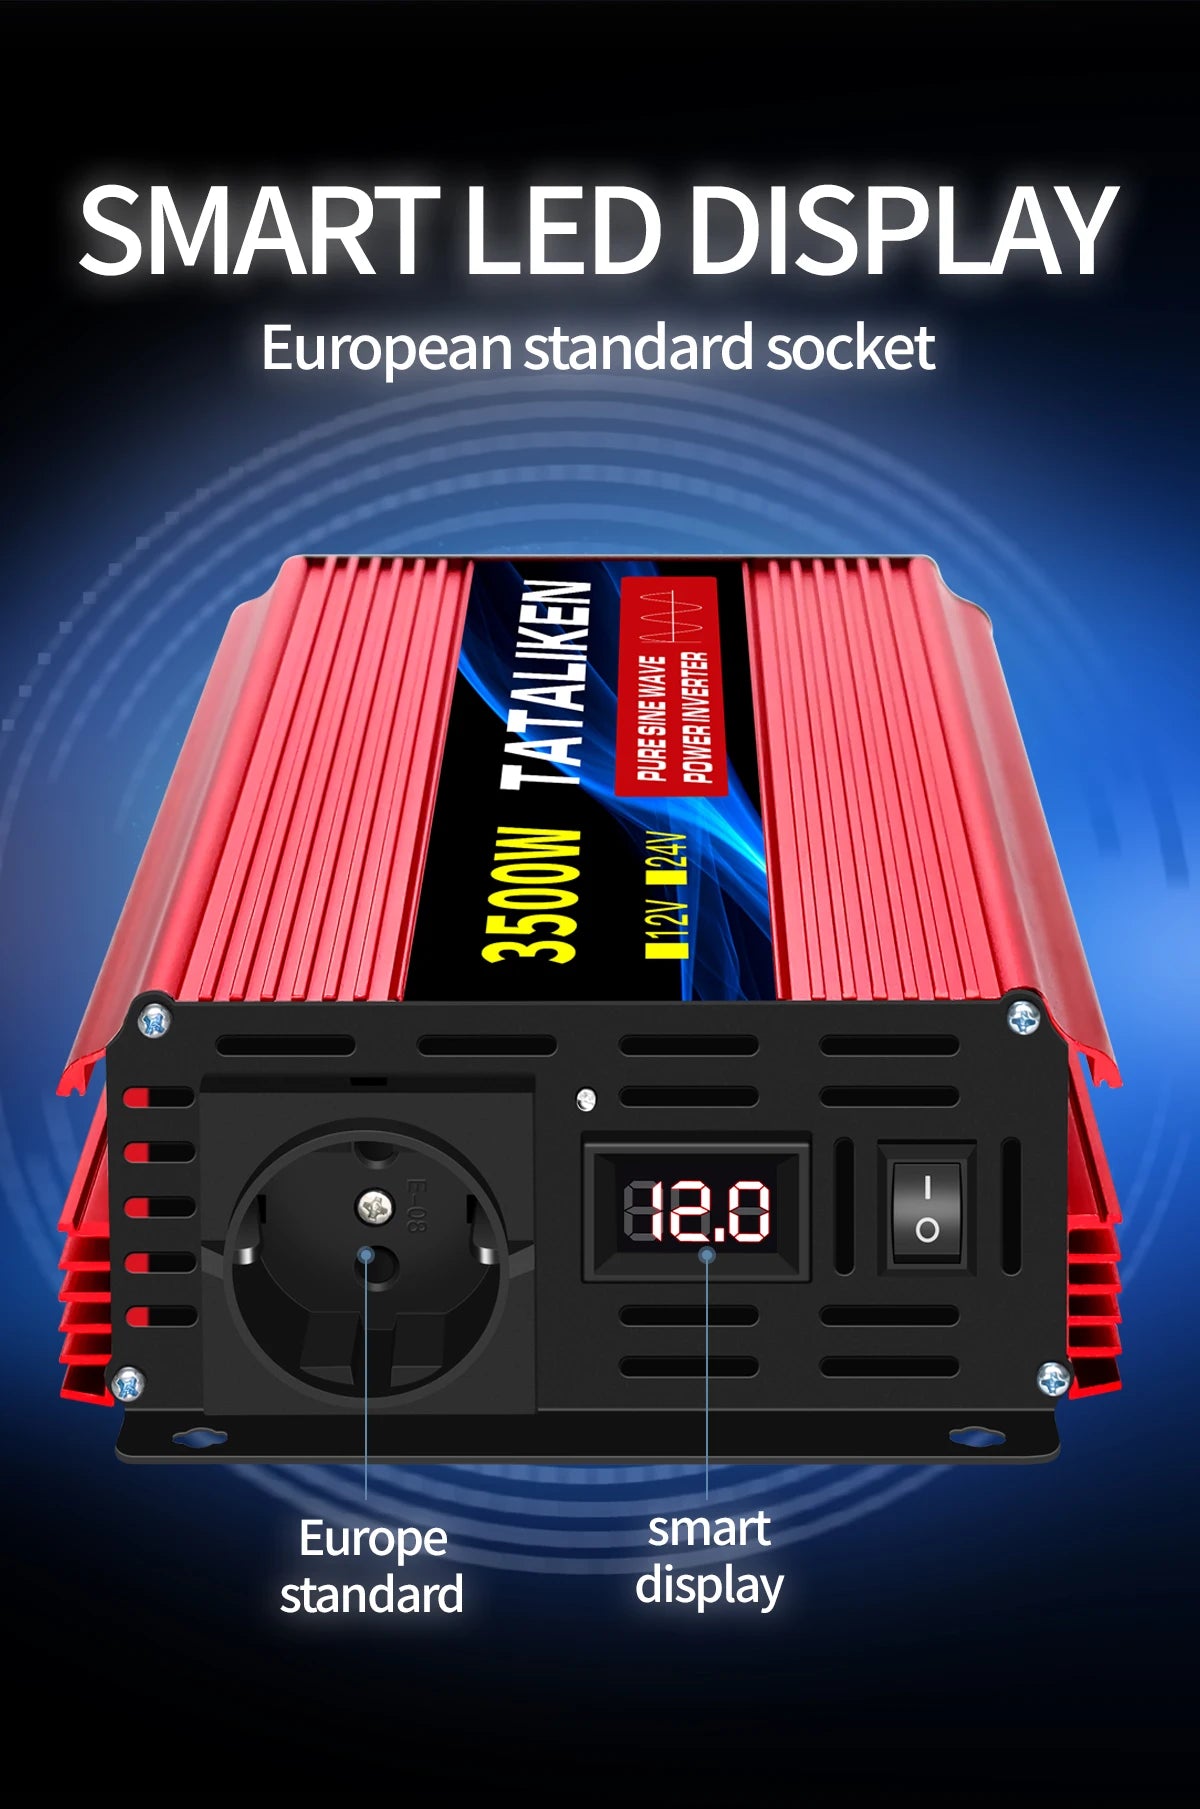 Inverter, Compact LED display with EU-compatible charging port for effortless power-up.